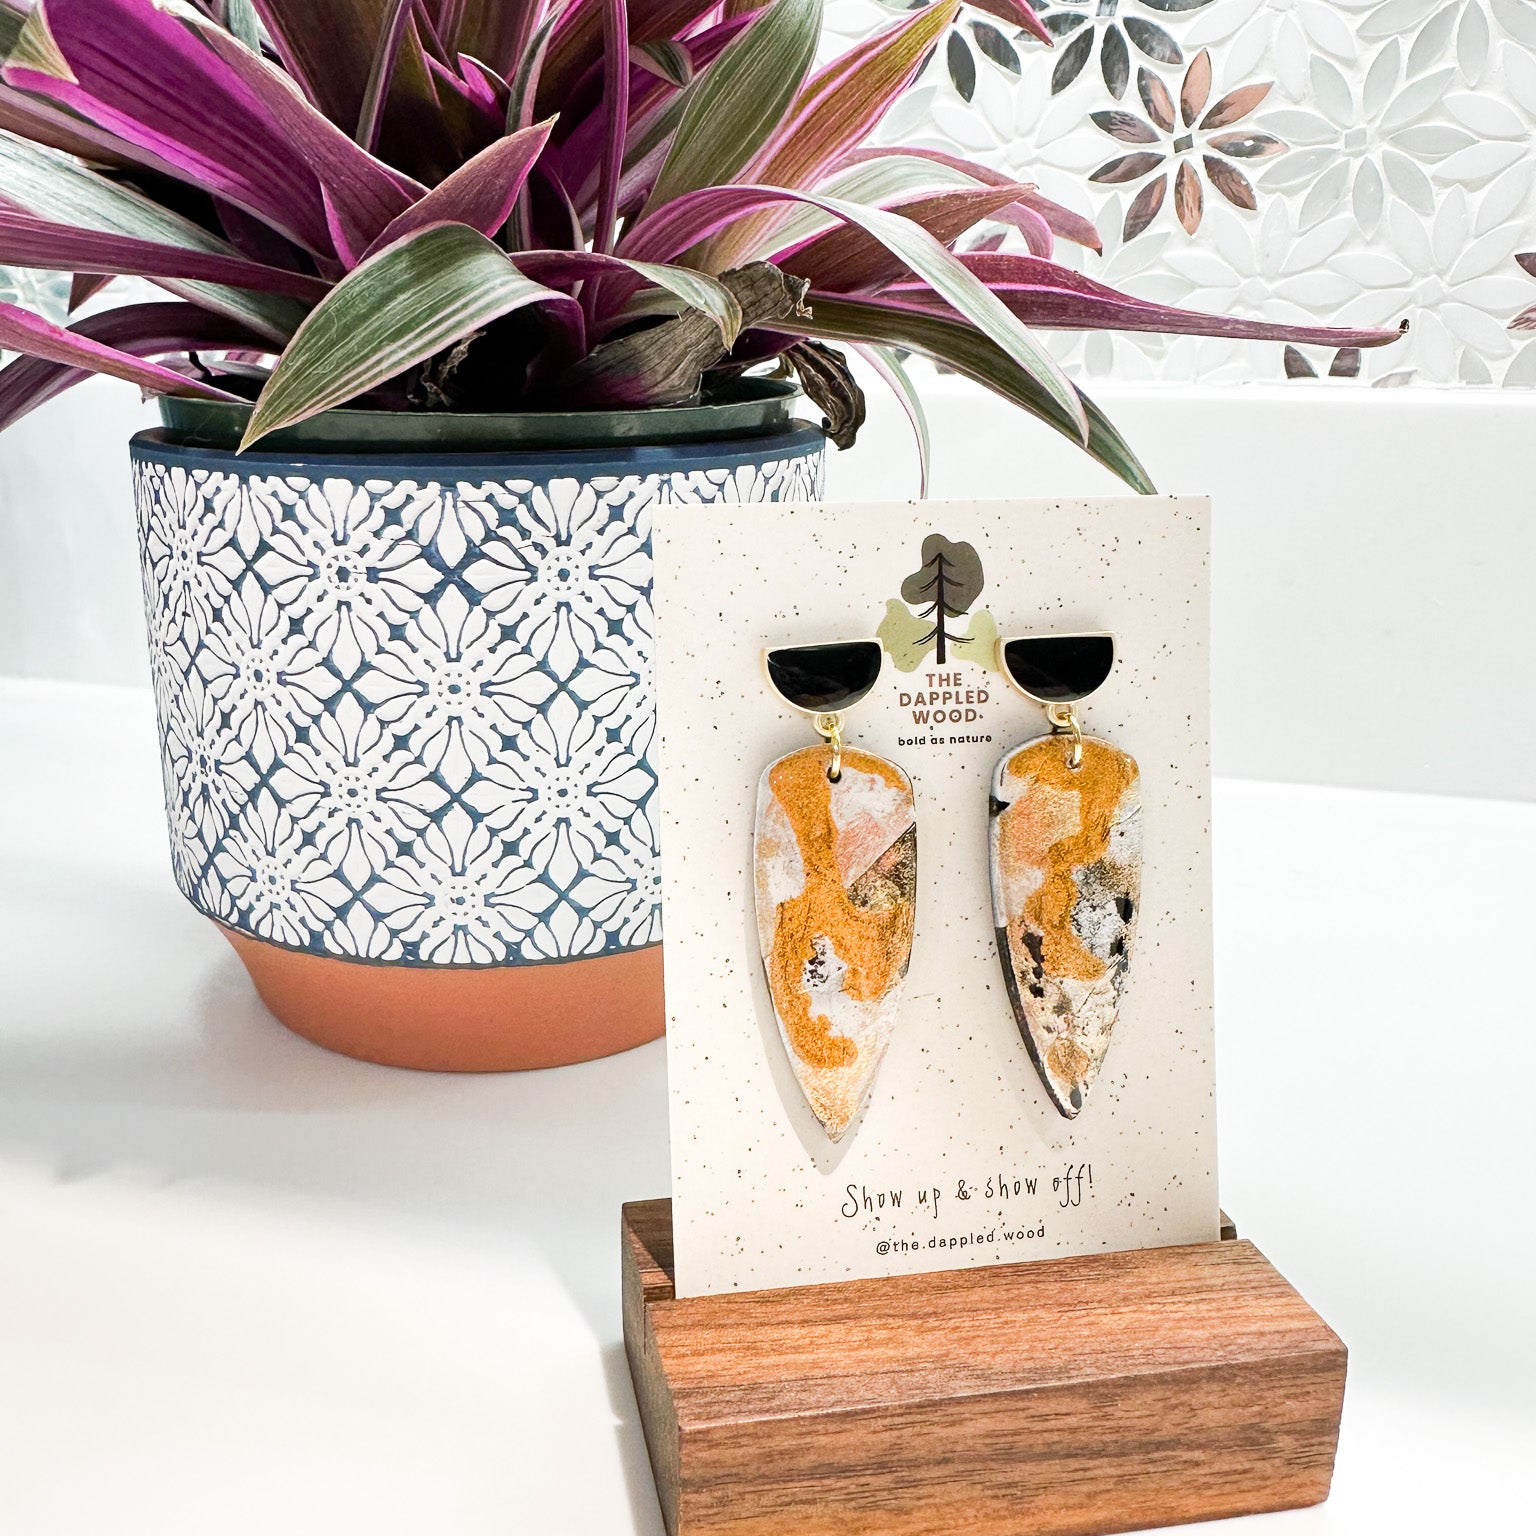 Handcrafted dagger shaped polymer clay earrings with gold flecks displayed on a branded card by @the.dappled.wood, placed against a decorative mosaic backdrop with a vibrant purple-leafed plant in a patterned pot.